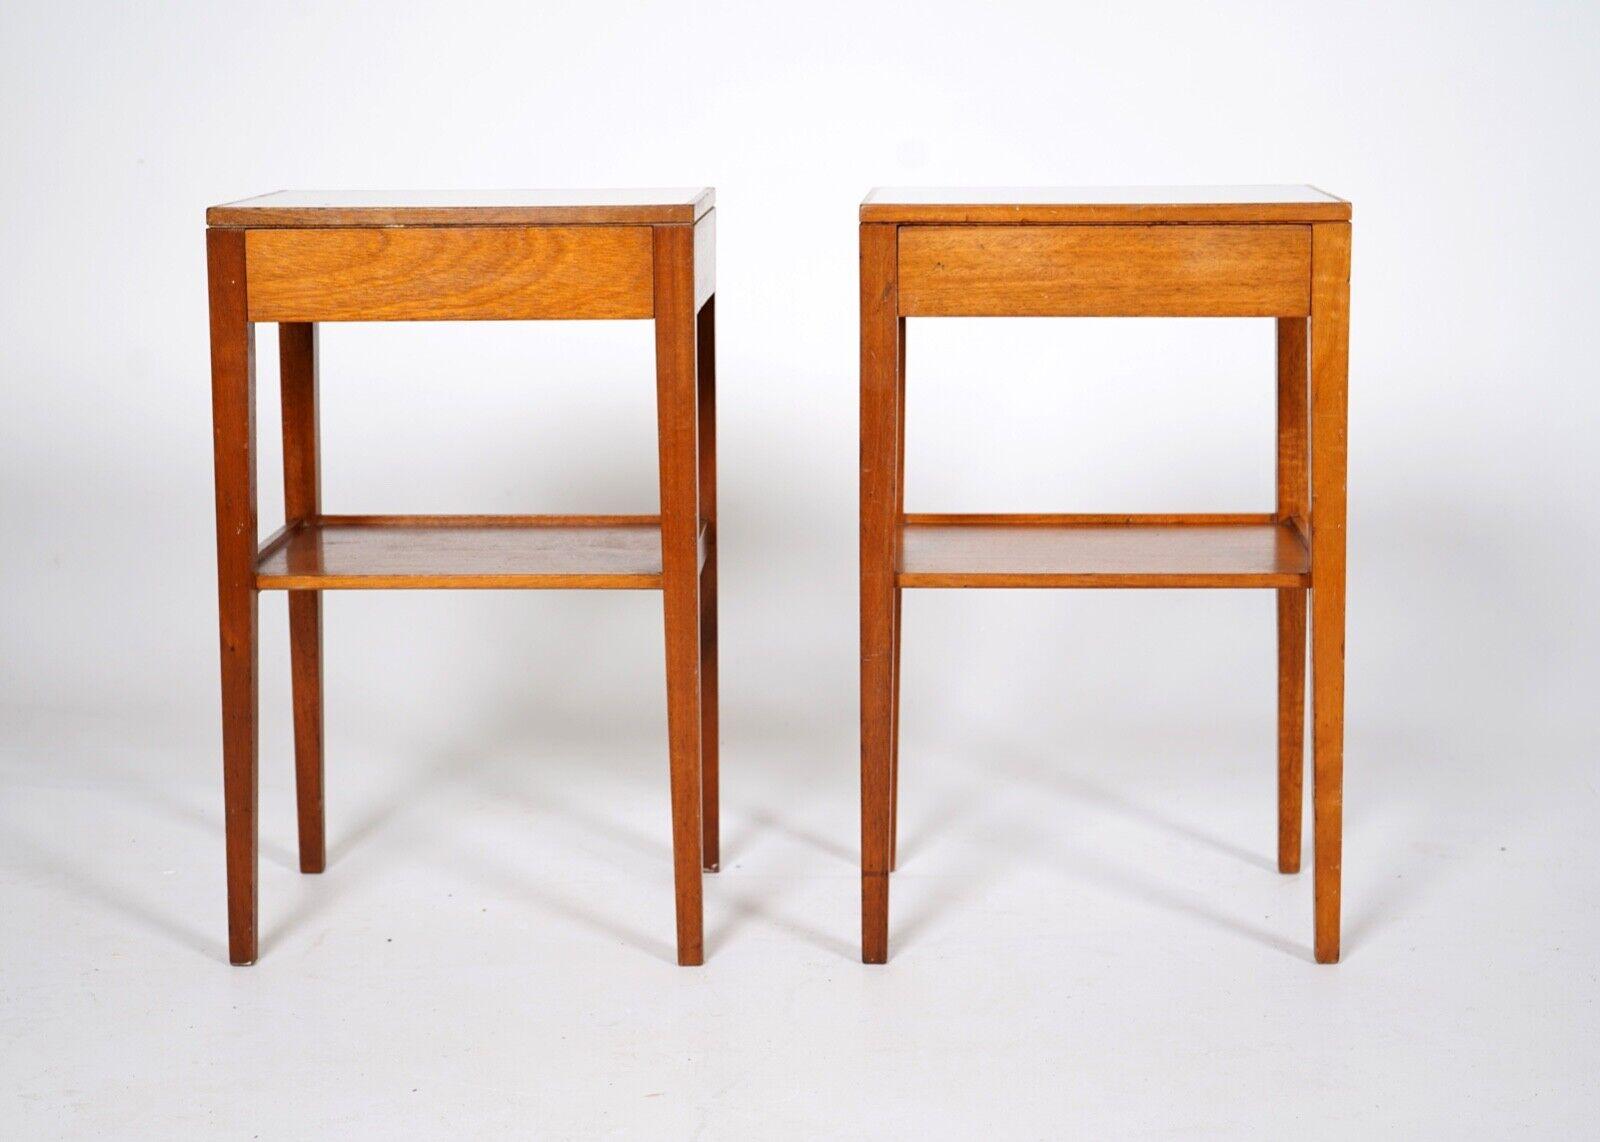 British Pair of Midcentury Teak Remploy Bedside Tables